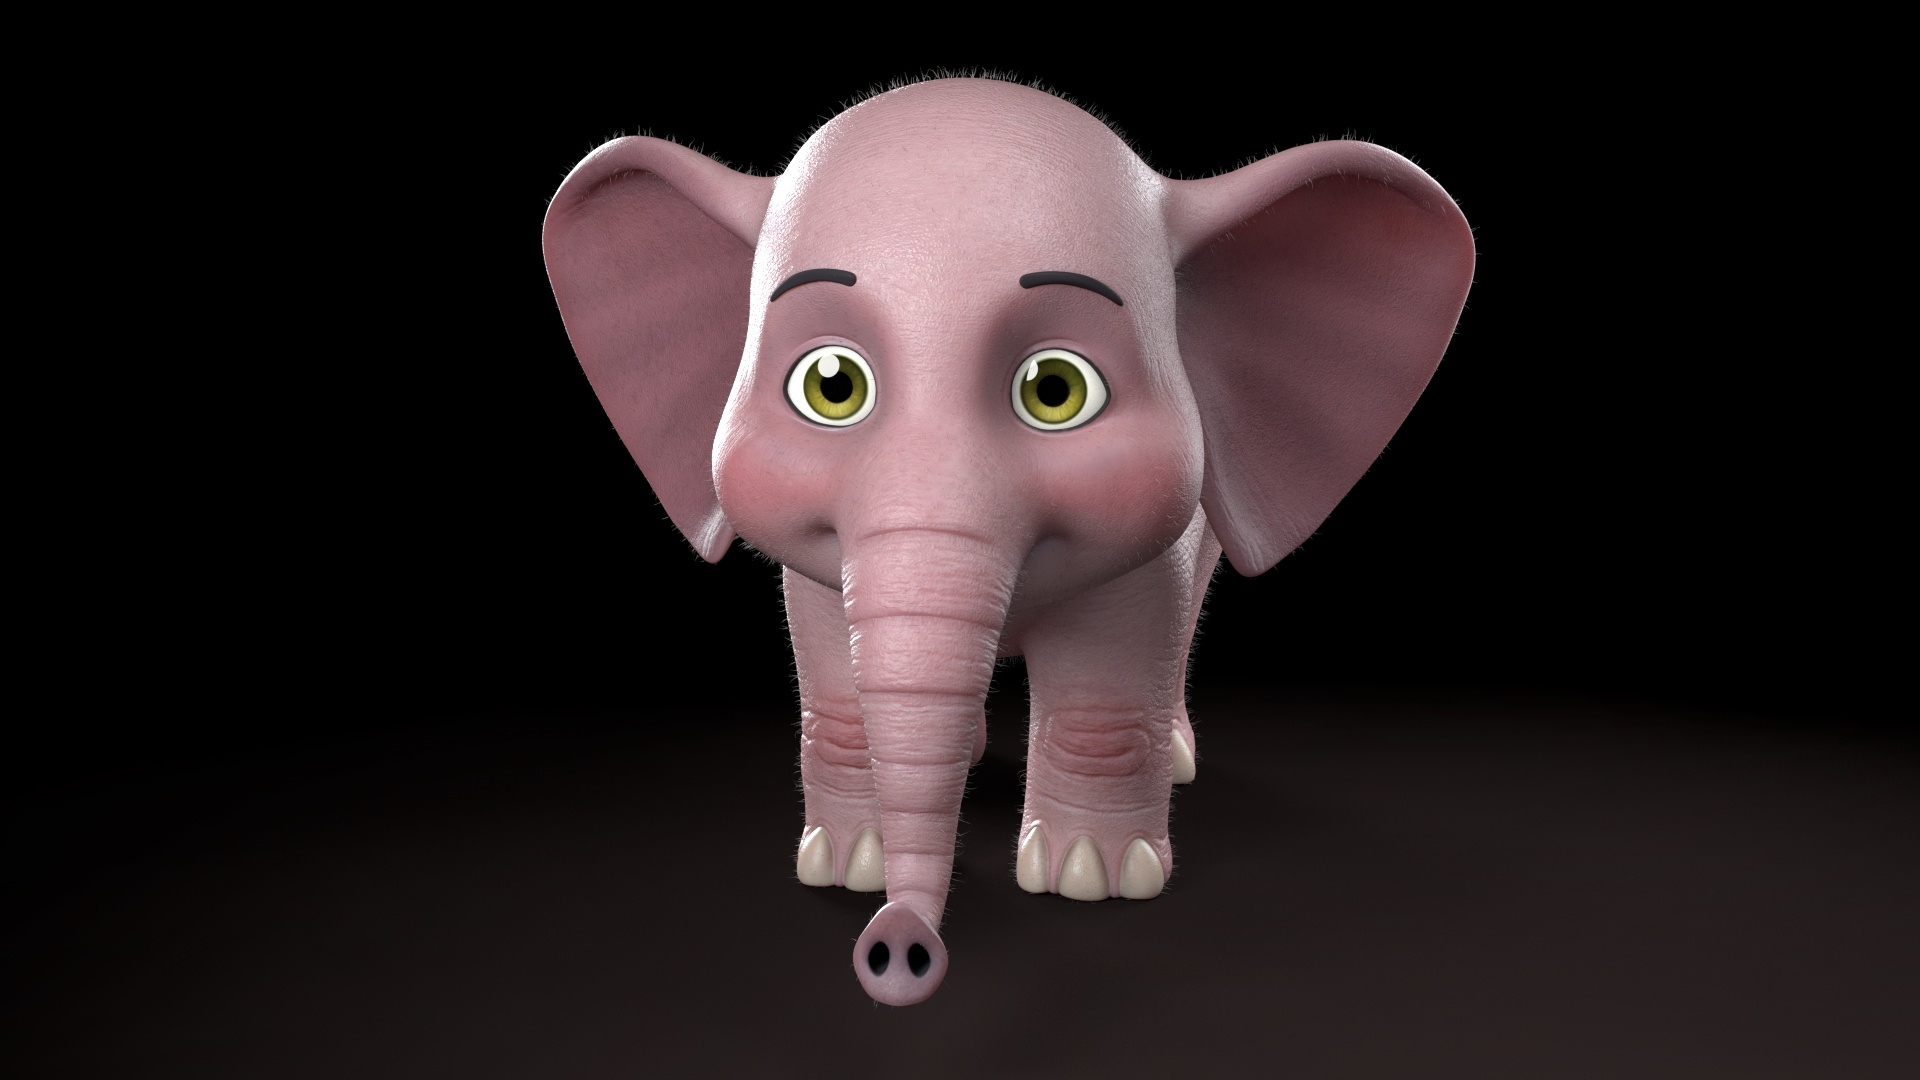 Cute Baby Elephant Animated Background, Cartoon Elephant Pictures, Elephant,  Cartoon Background Image And Wallpaper for Free Download